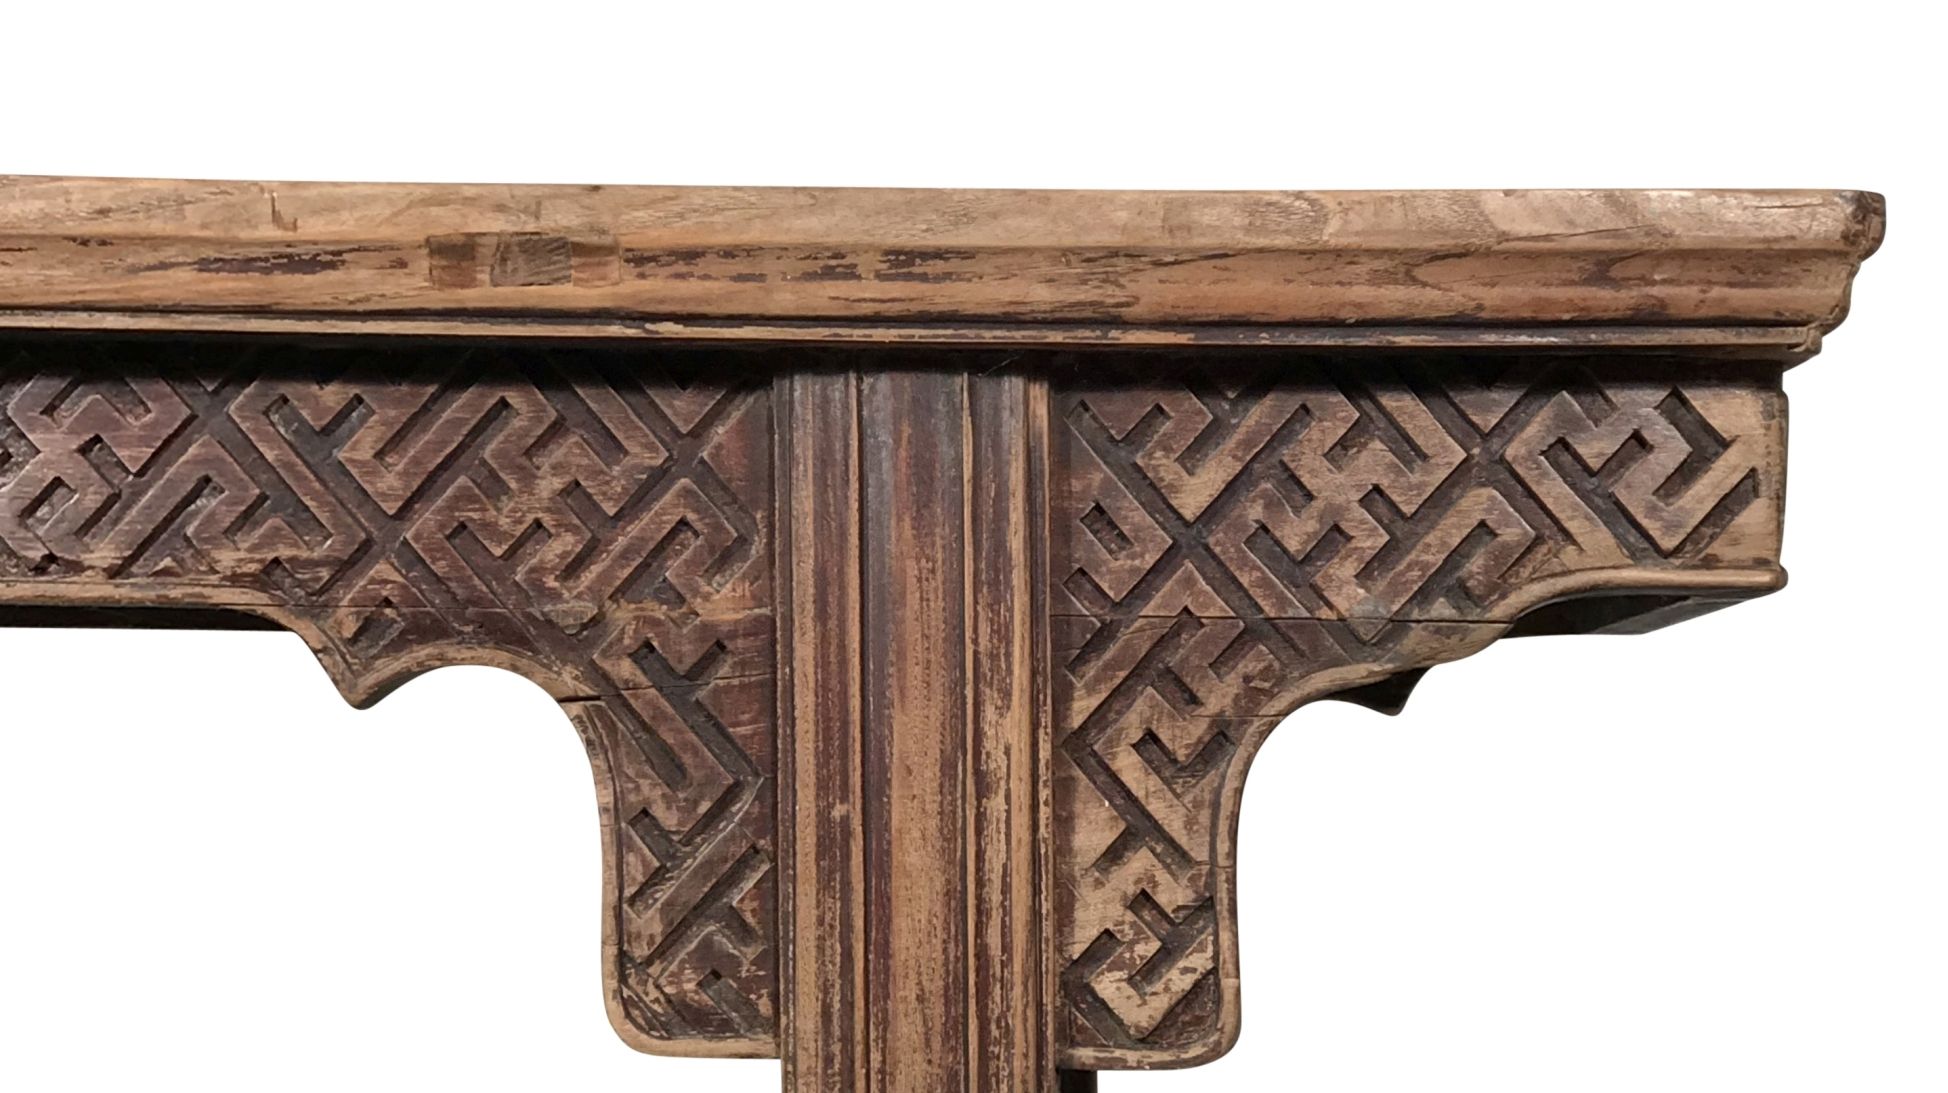 Shop all oriental antiques recent arrivals such as this beautiful Chinese antique console table